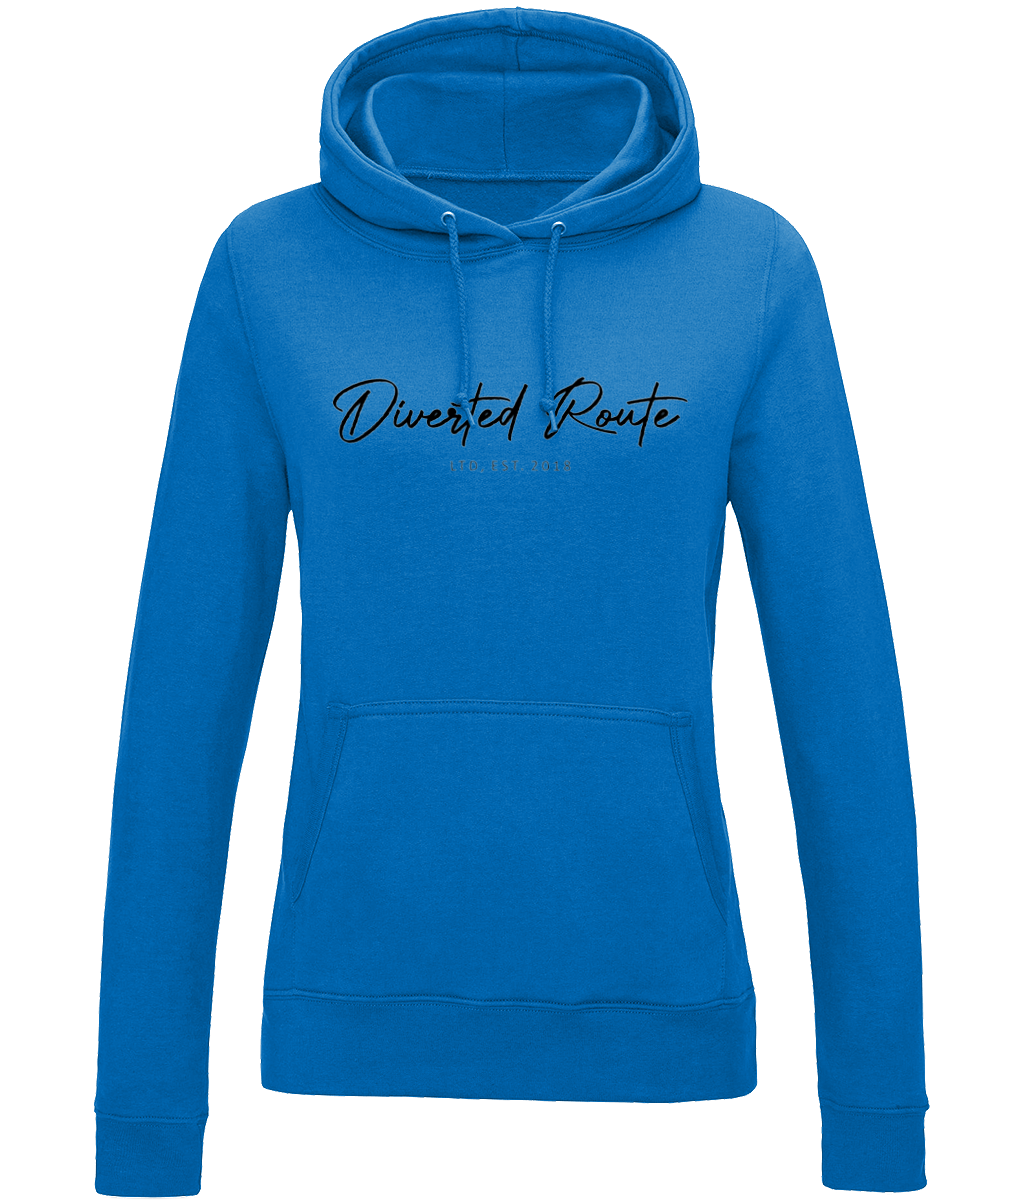 Diverted Route Ltd Womens Signature Hoody